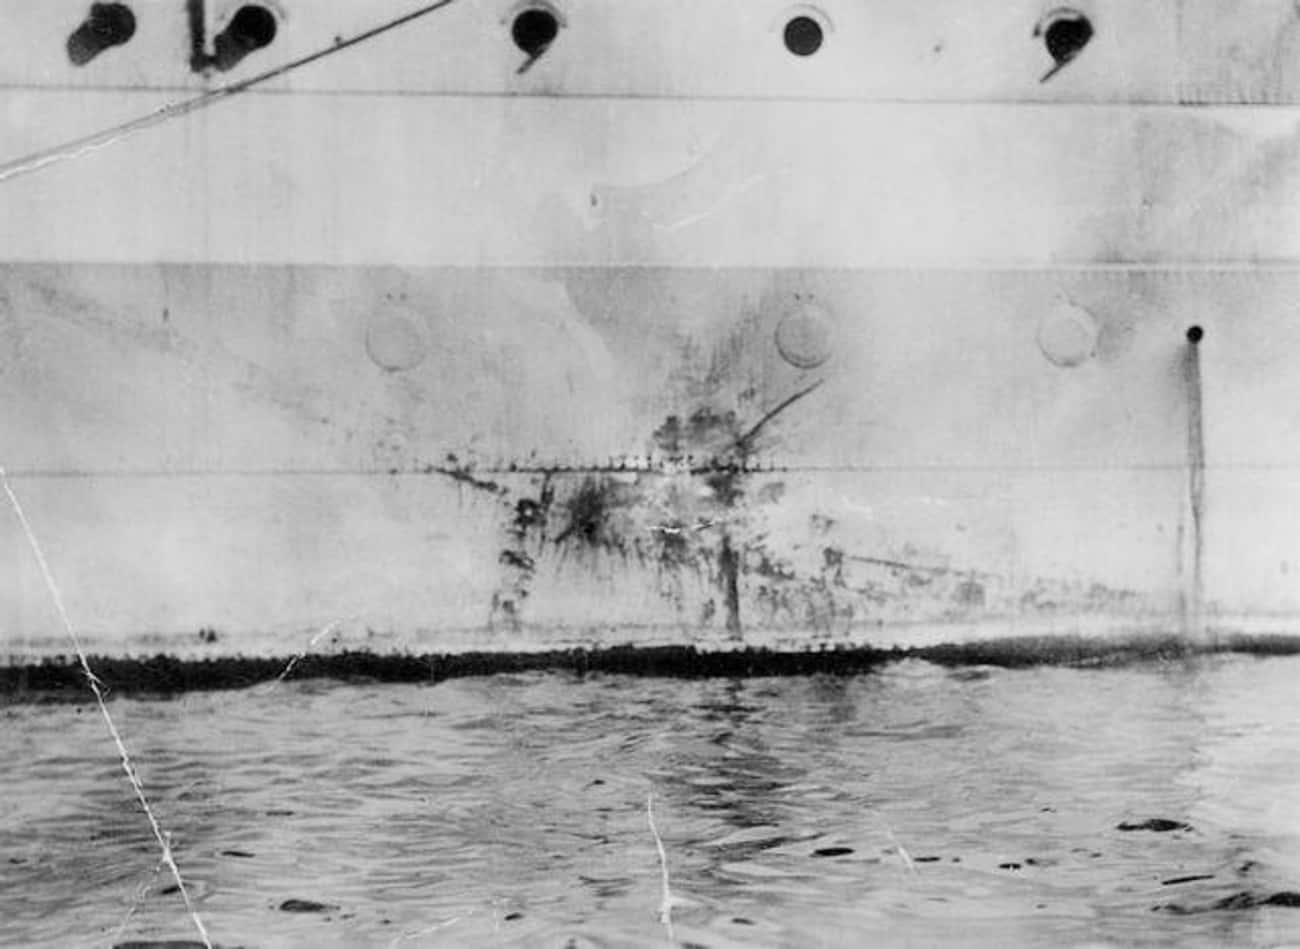 C. 1944: Remnants Of A Kamikaze Plane On The HMS 'Sussex'